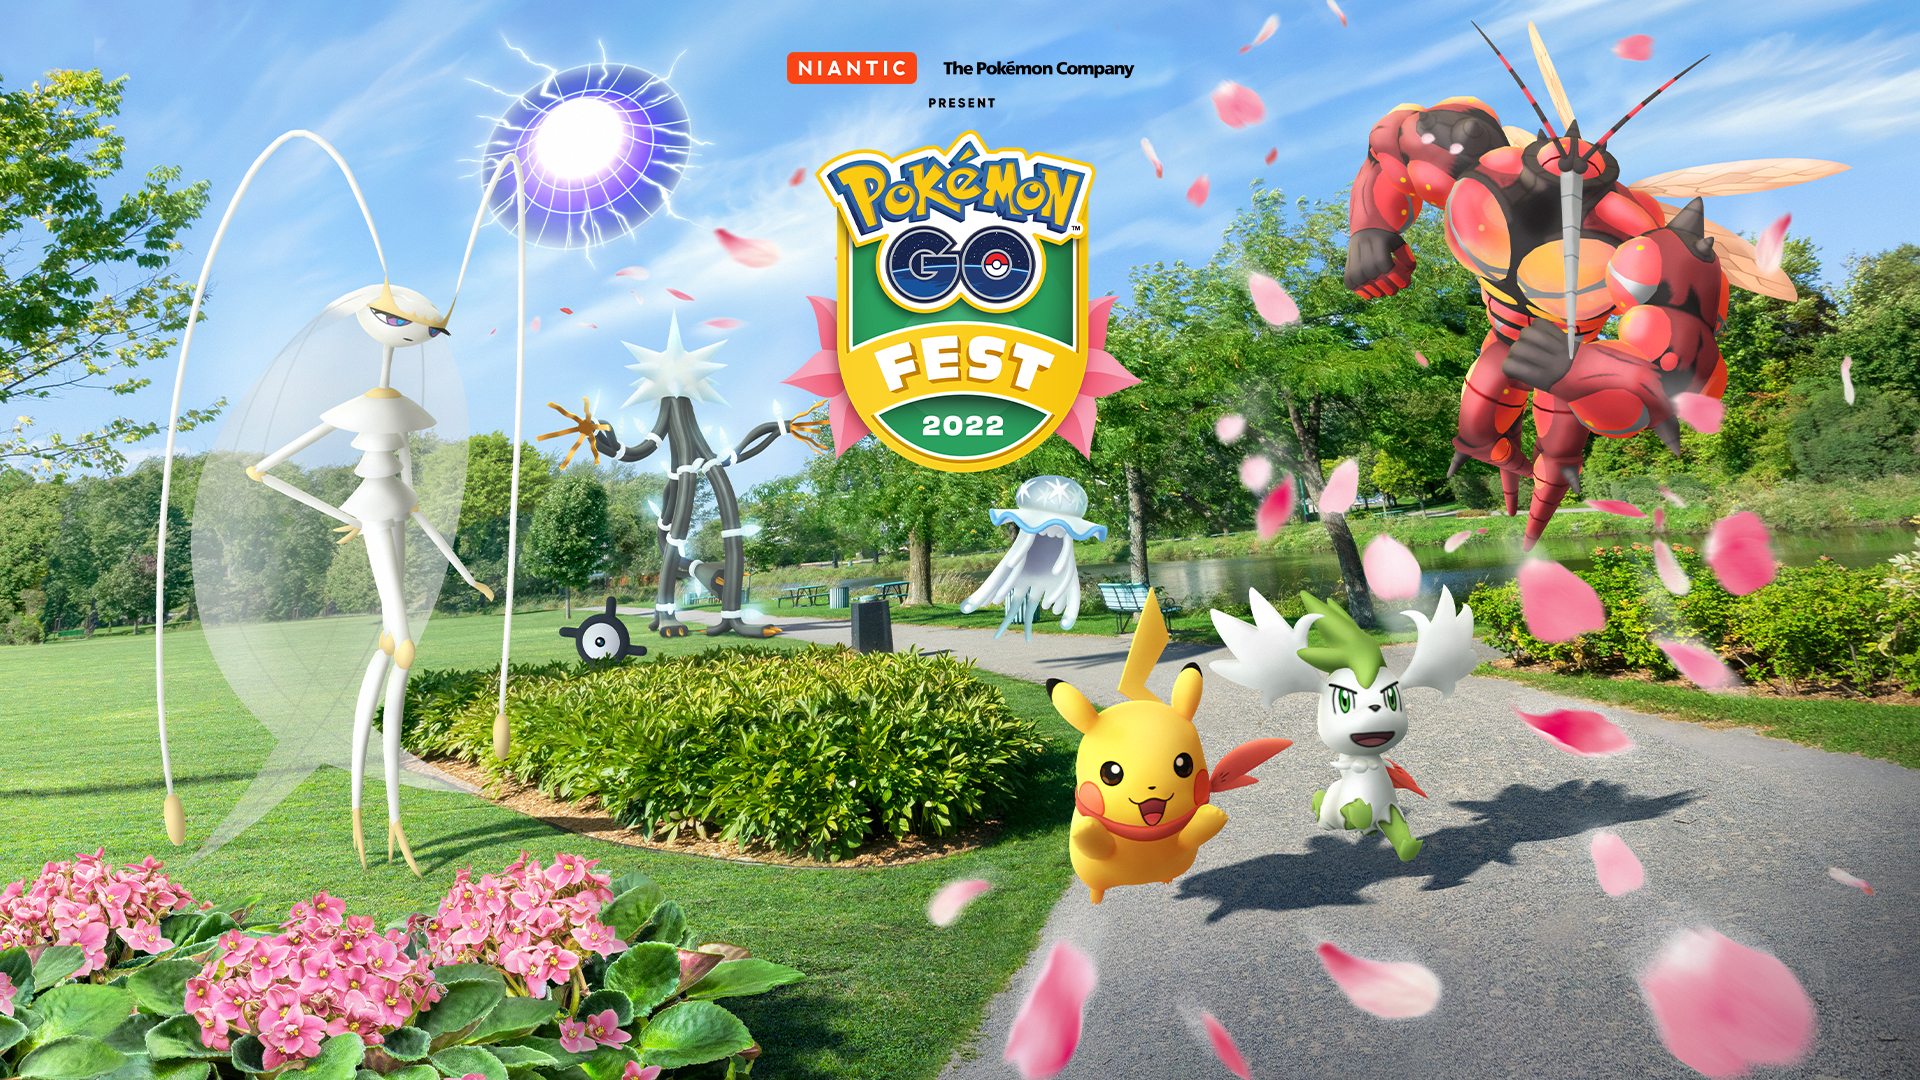 Artwork for Pokémon Go Fest 2022 featuring Pikachu, Shaymin, and Ultra Beasts playing in a park